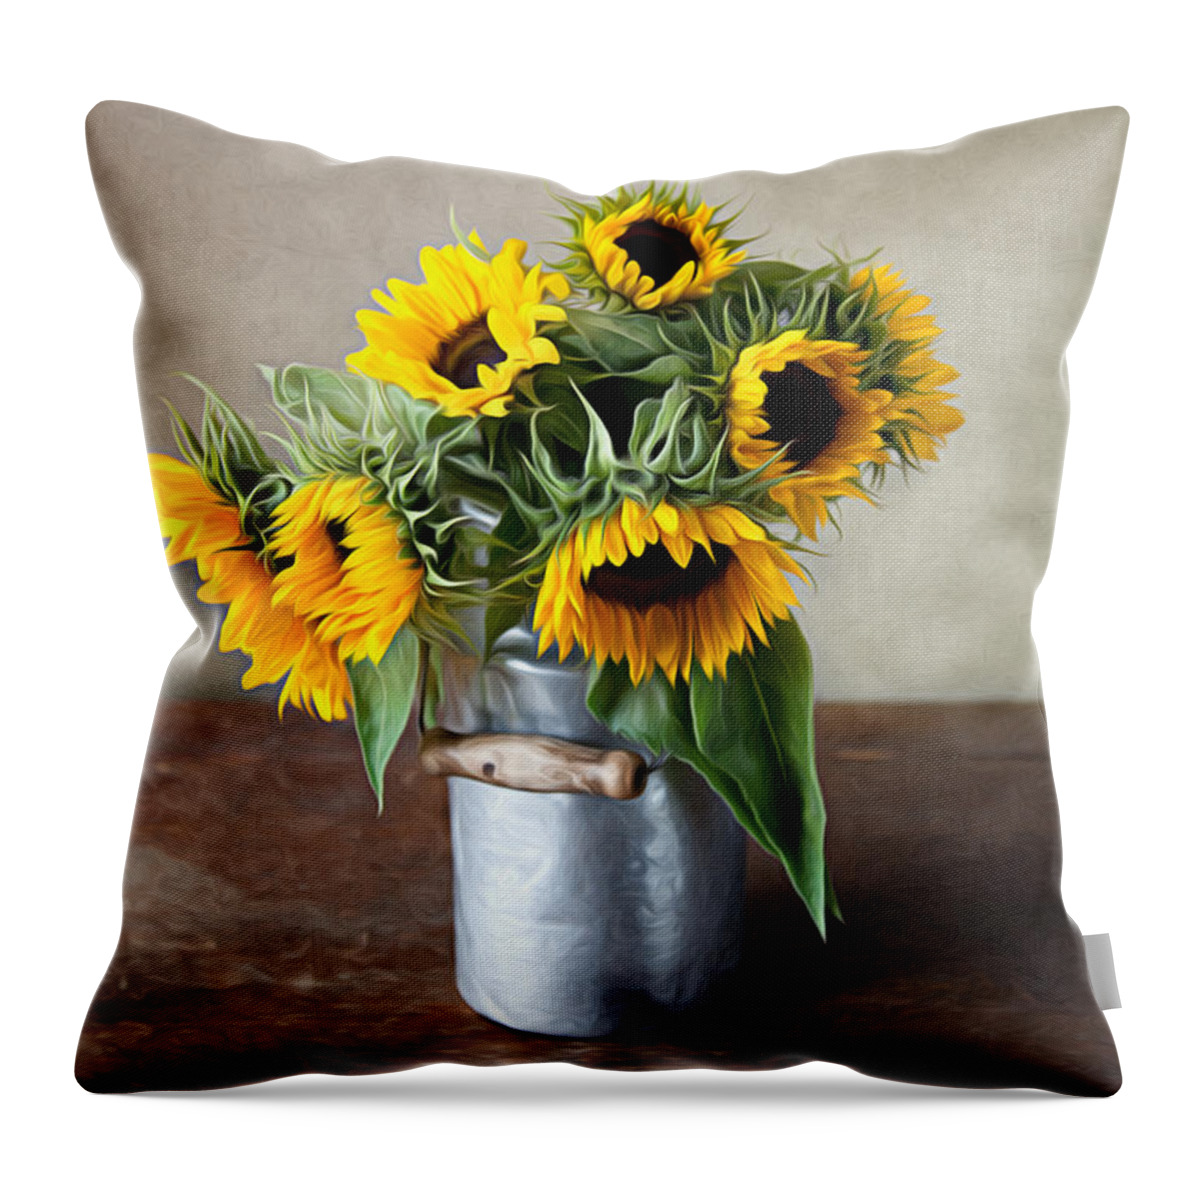 Sunflower Throw Pillow featuring the photograph Sunflowers by Nailia Schwarz